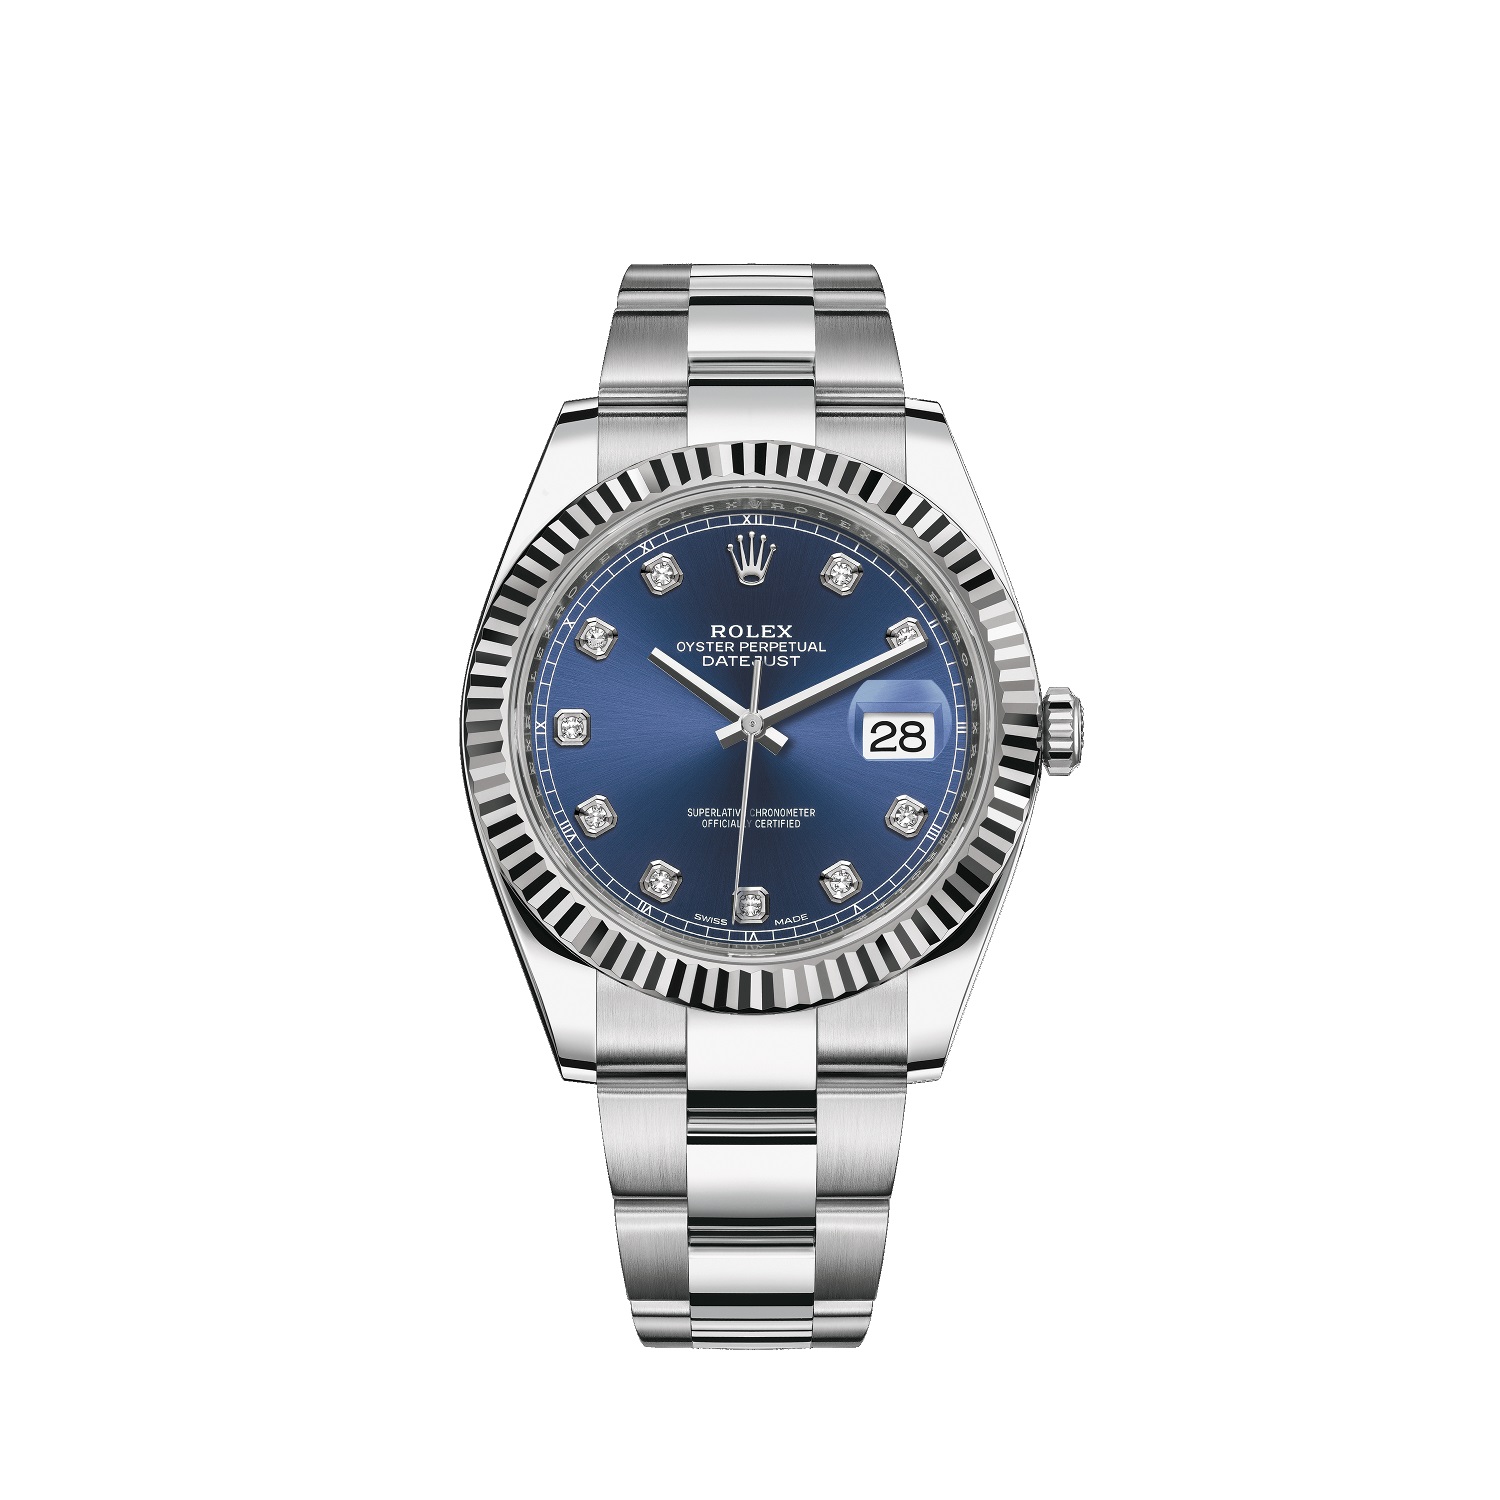 Datejust 41 126334 White Gold & Stainless Steel Watch (Blue Set with Diamonds)